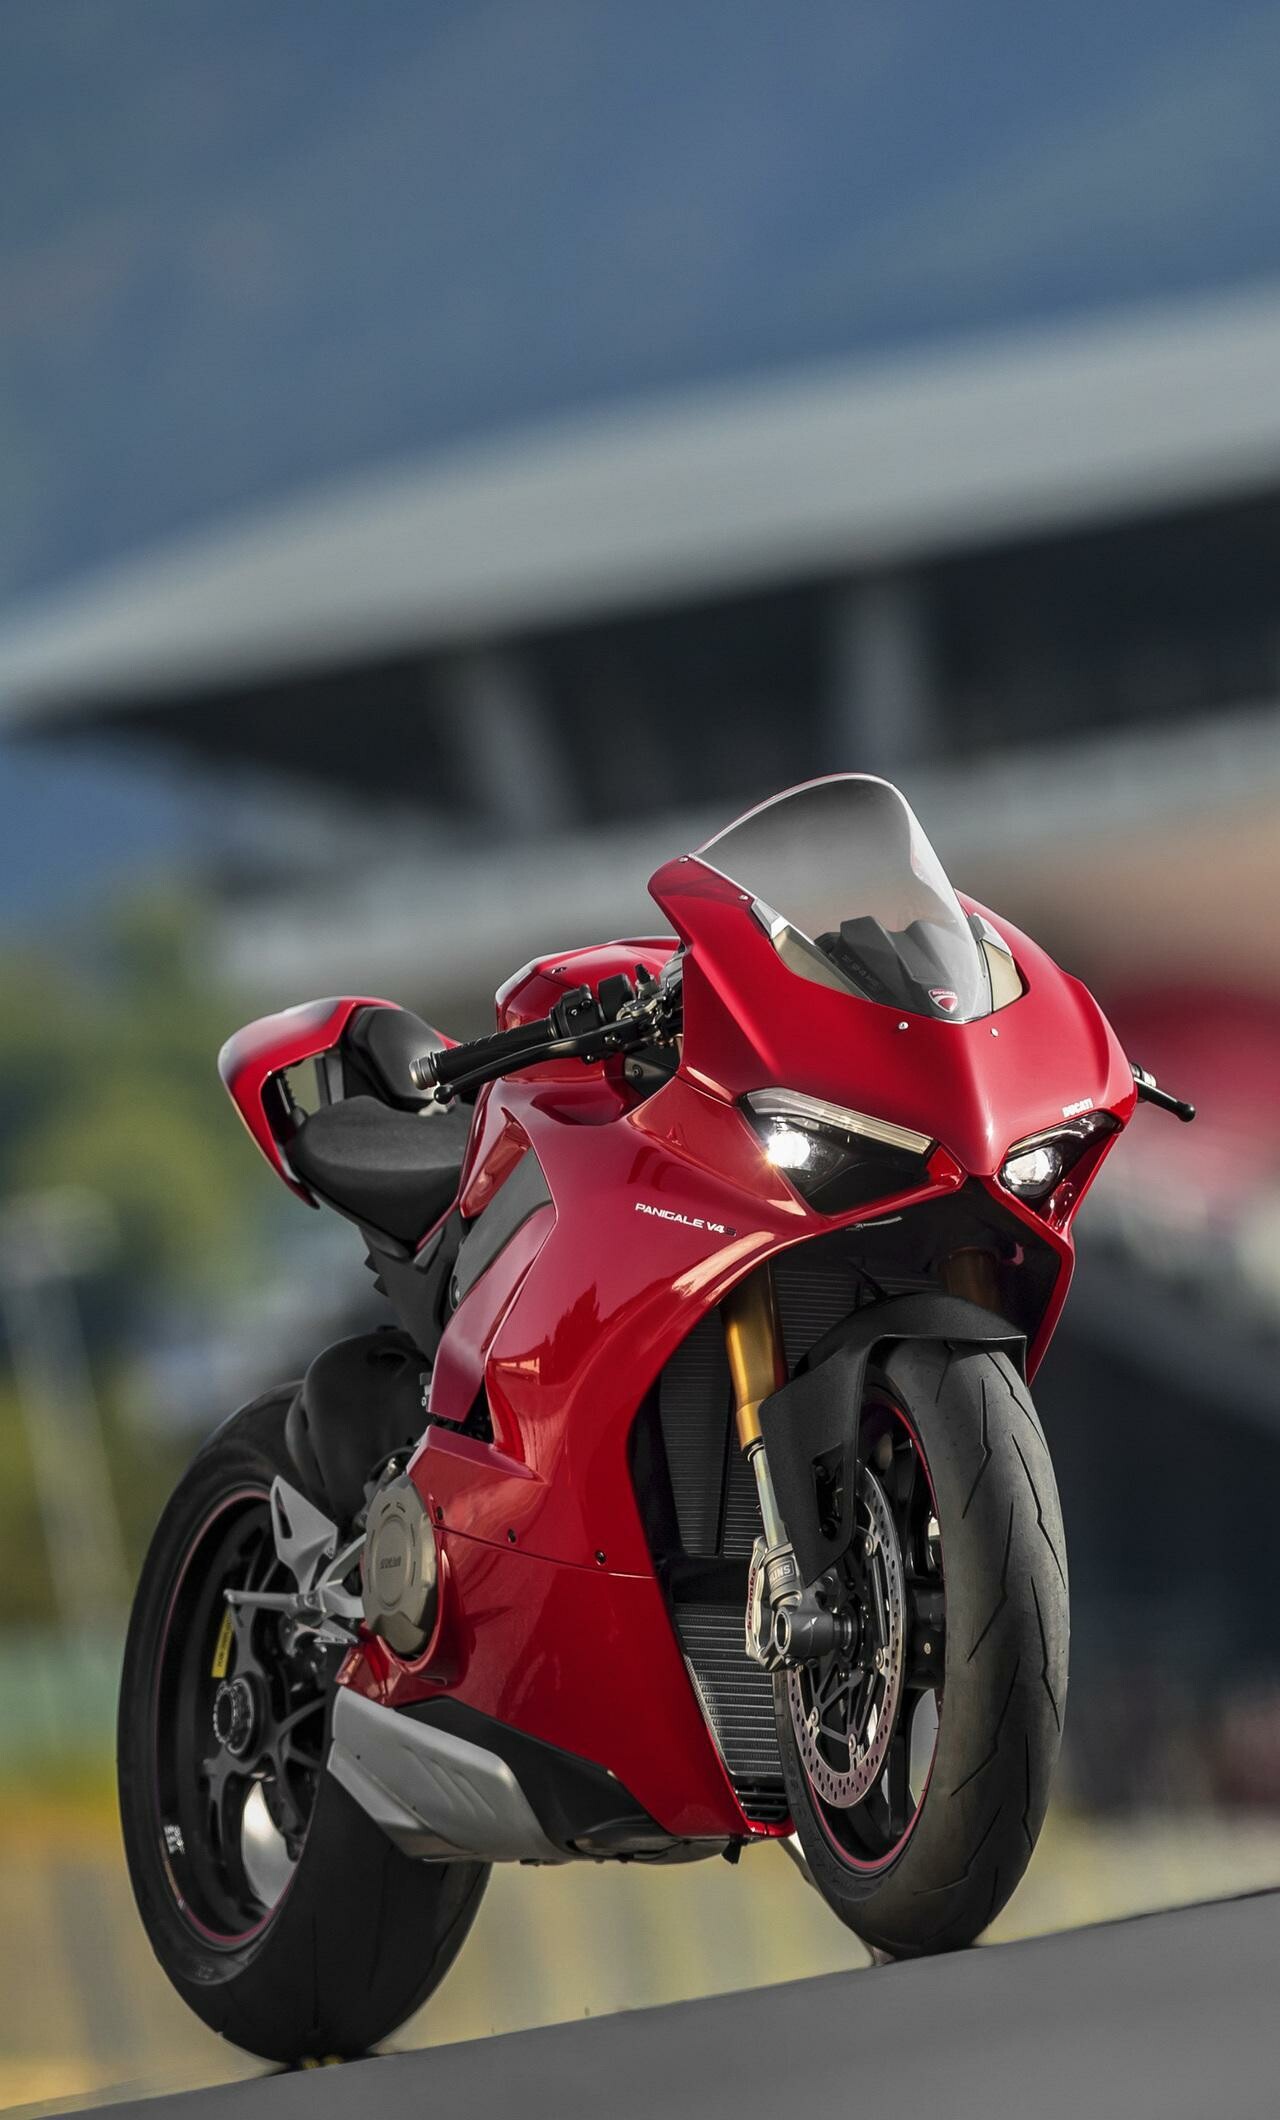 Ducati: The company introduced the 860 GT model in 1975. 1280x2120 HD Wallpaper.